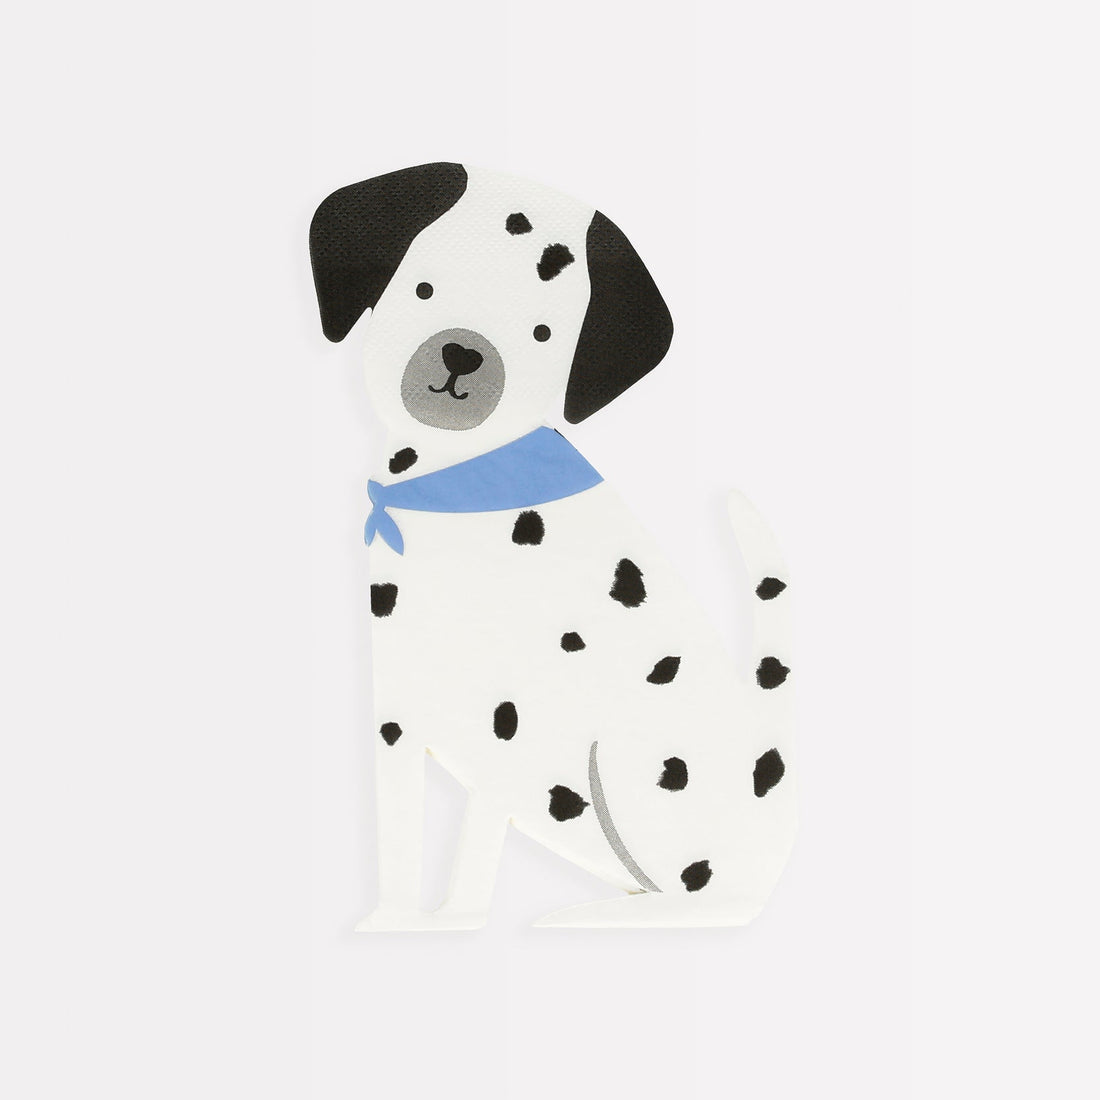 Flat illustration of a dalmatian puppy with black spots and a blue collar on Meri Meri Puppy Napkins.